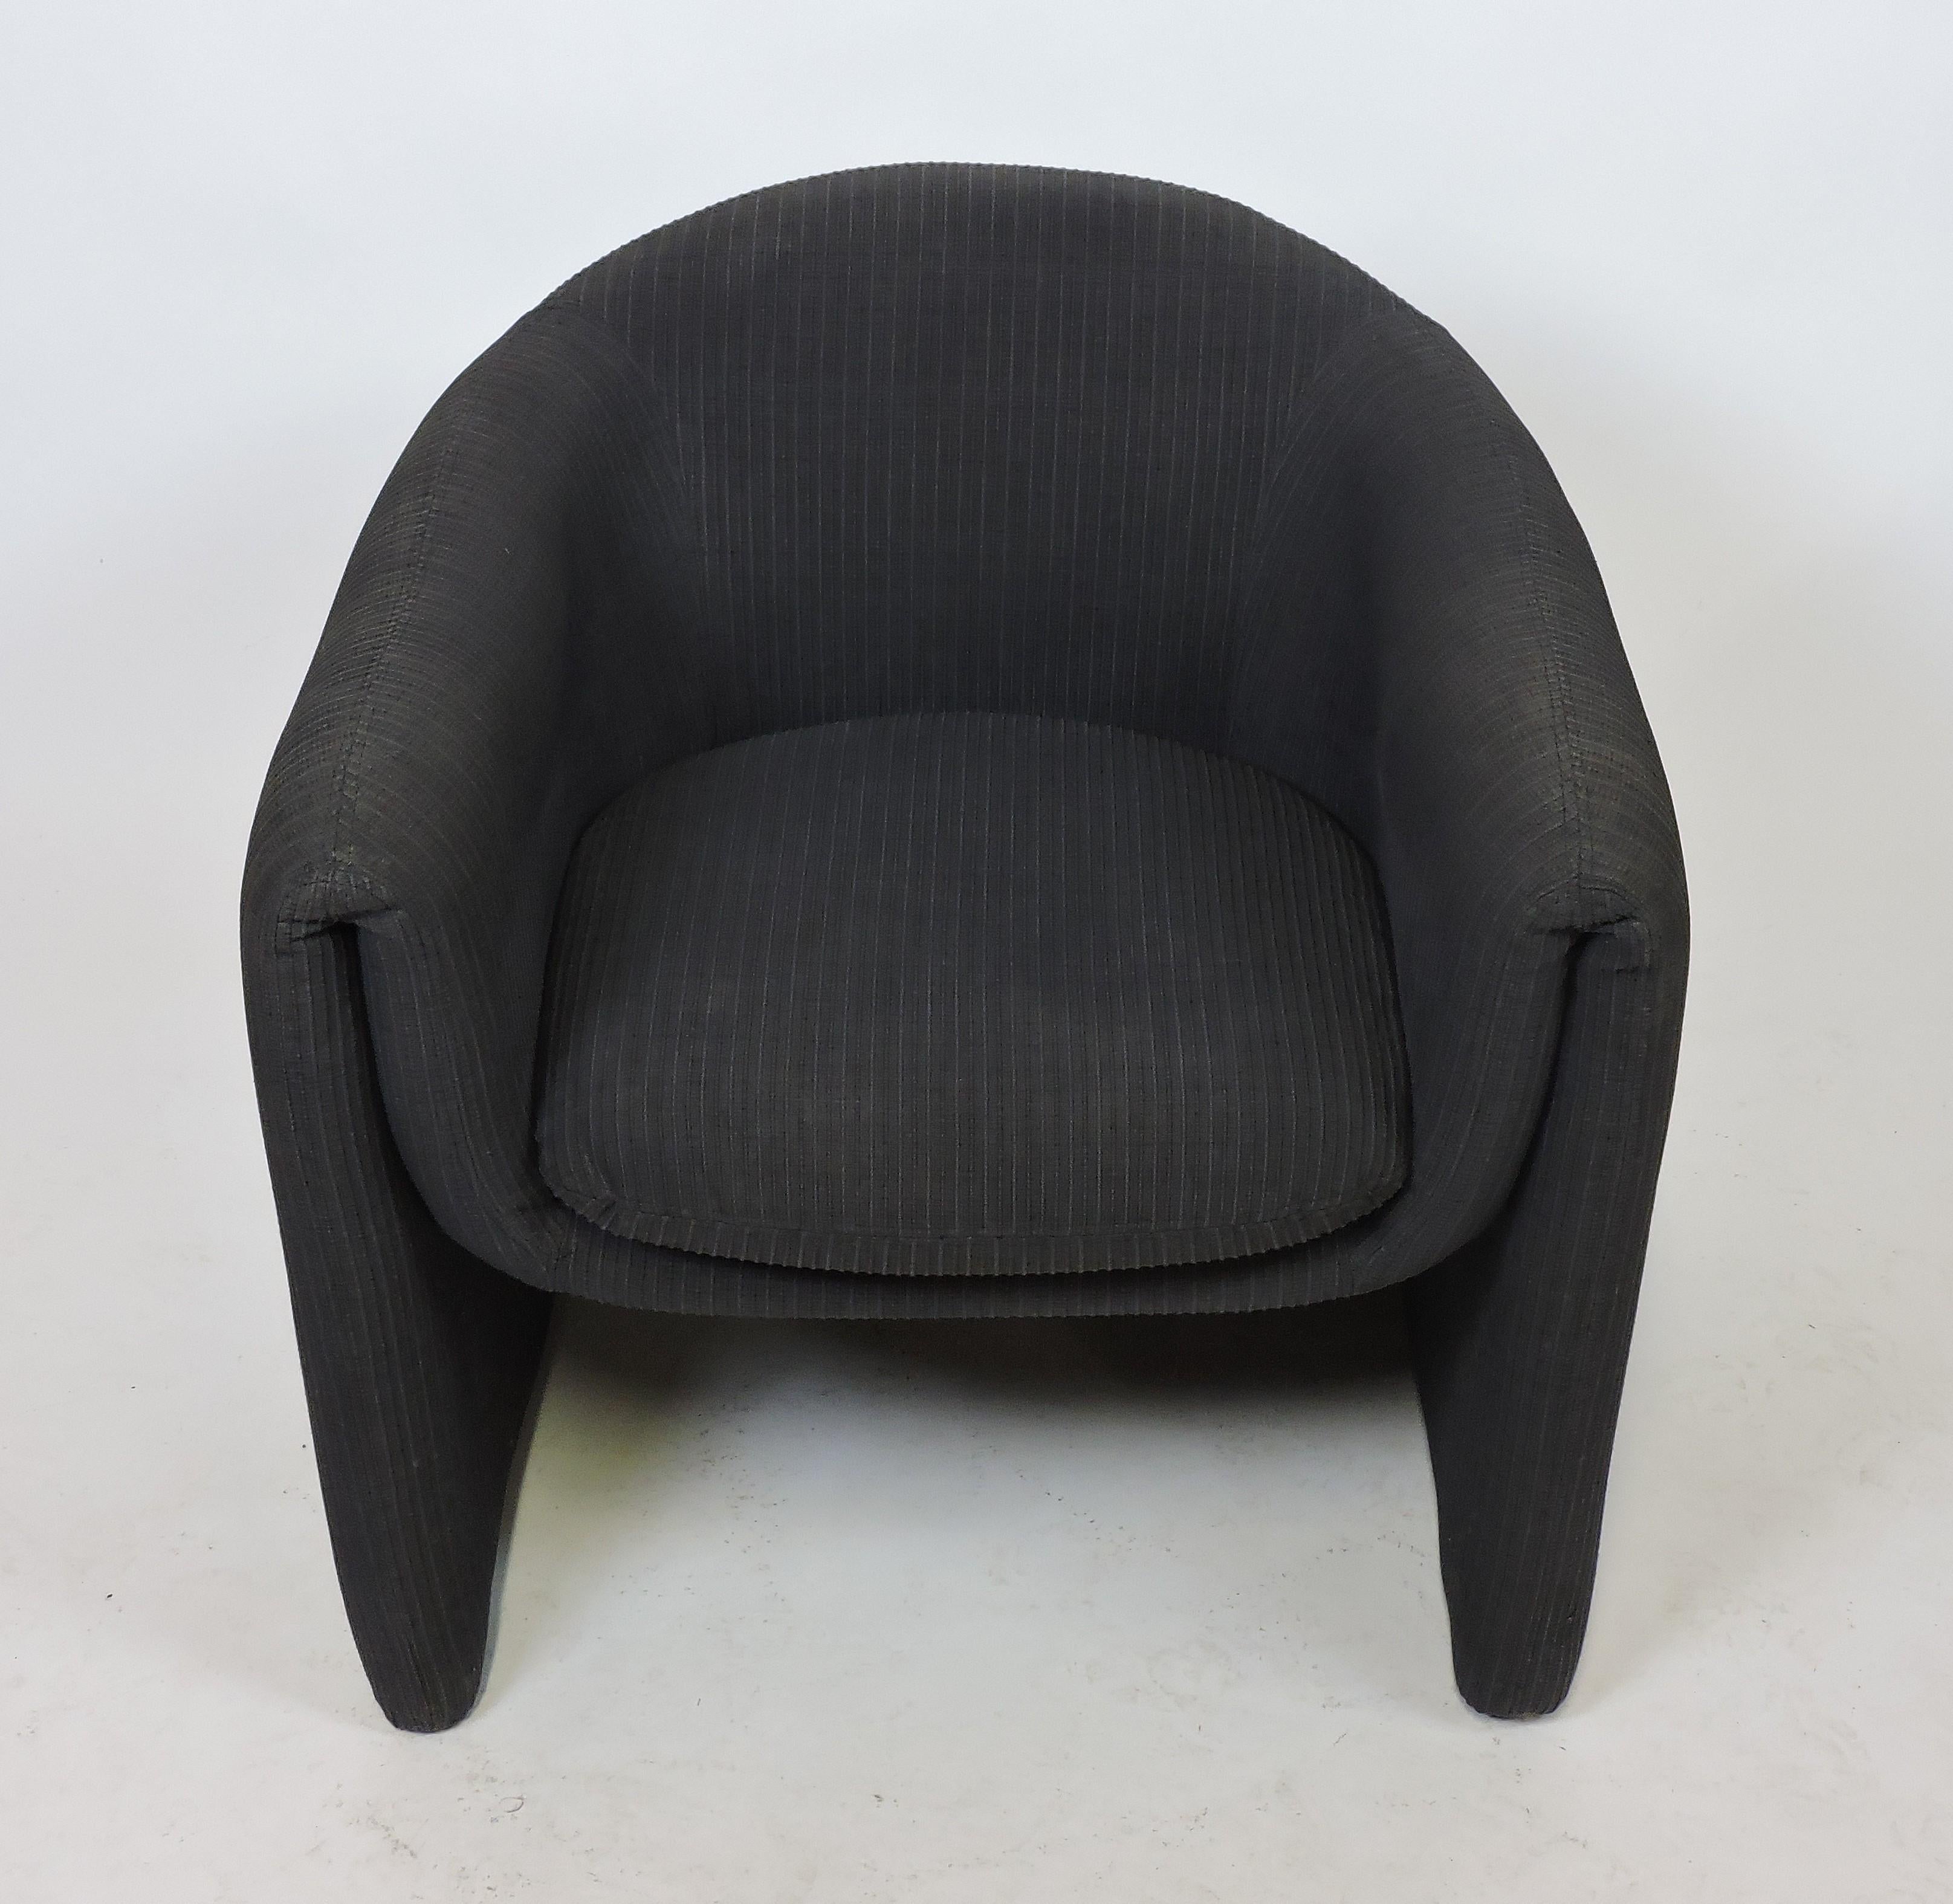 Curved and sculptural upholstered barrel back tub chair made by high quality furniture manufacturer, Preview. This chair has a loose seat cushion and is upholstered in a charcoal gray textured fabric. Labeled with the Preview label and the date of